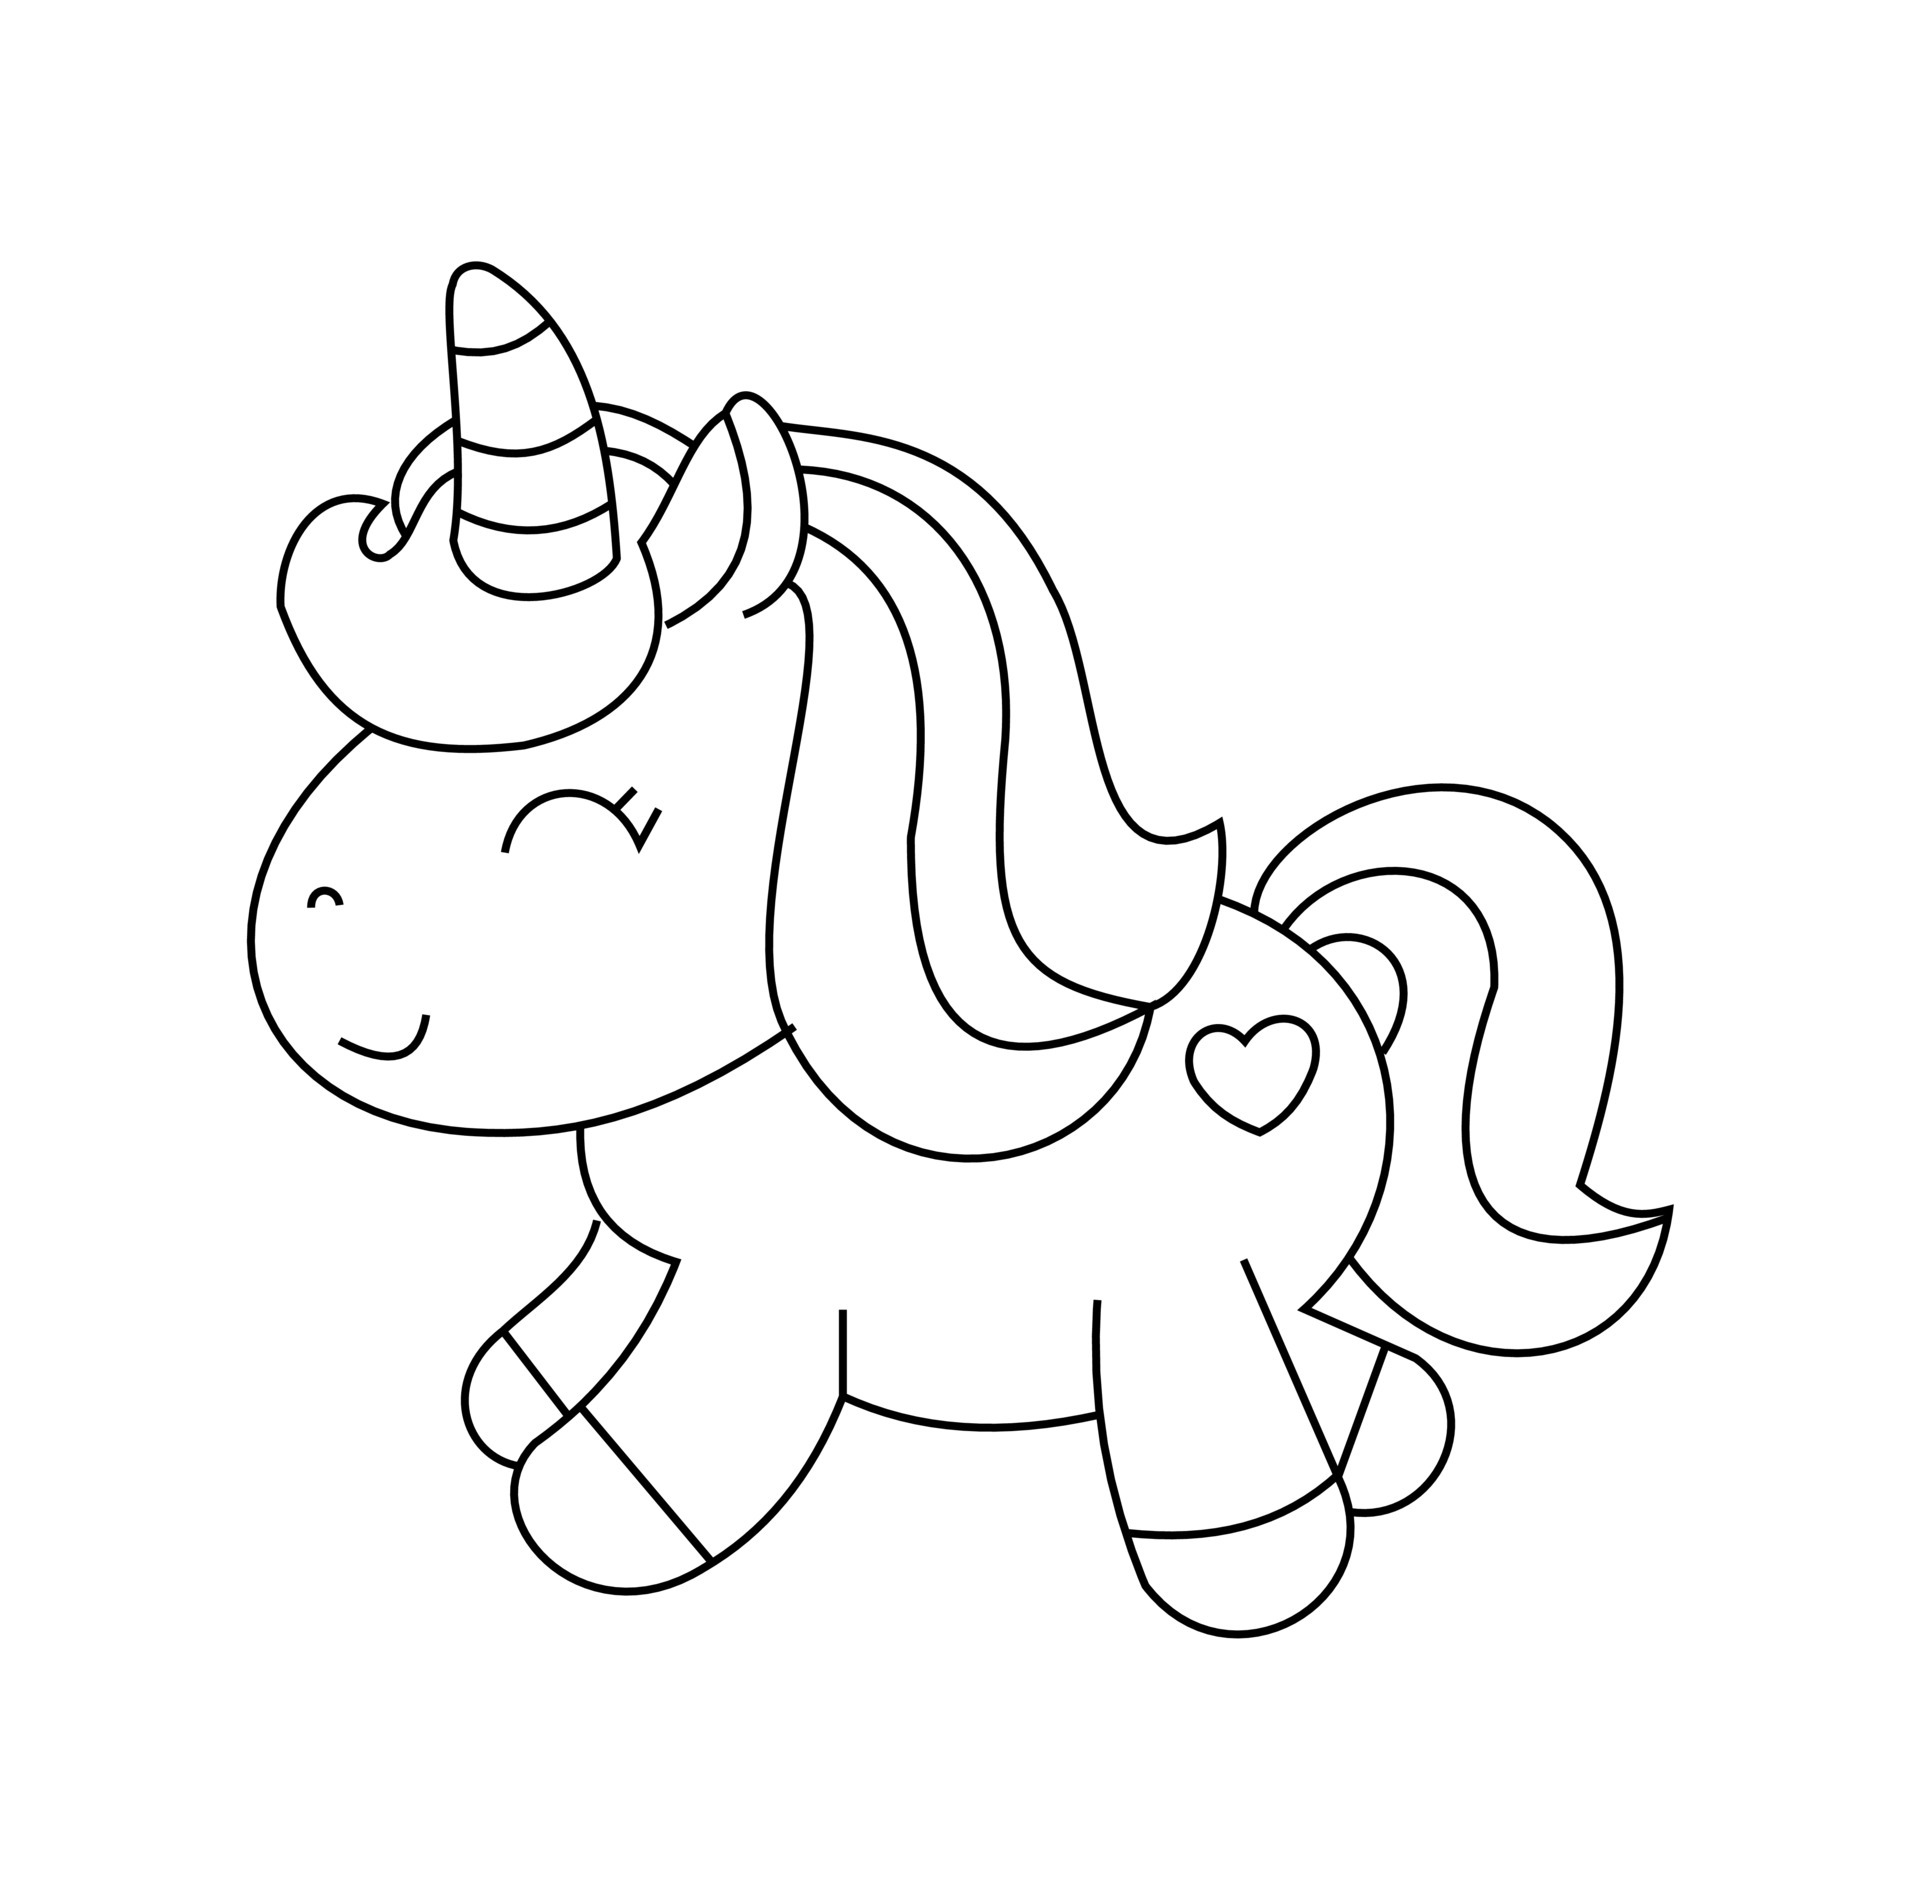 Unicorn Coloring Vector Art, Icons, and Graphics for Free Download